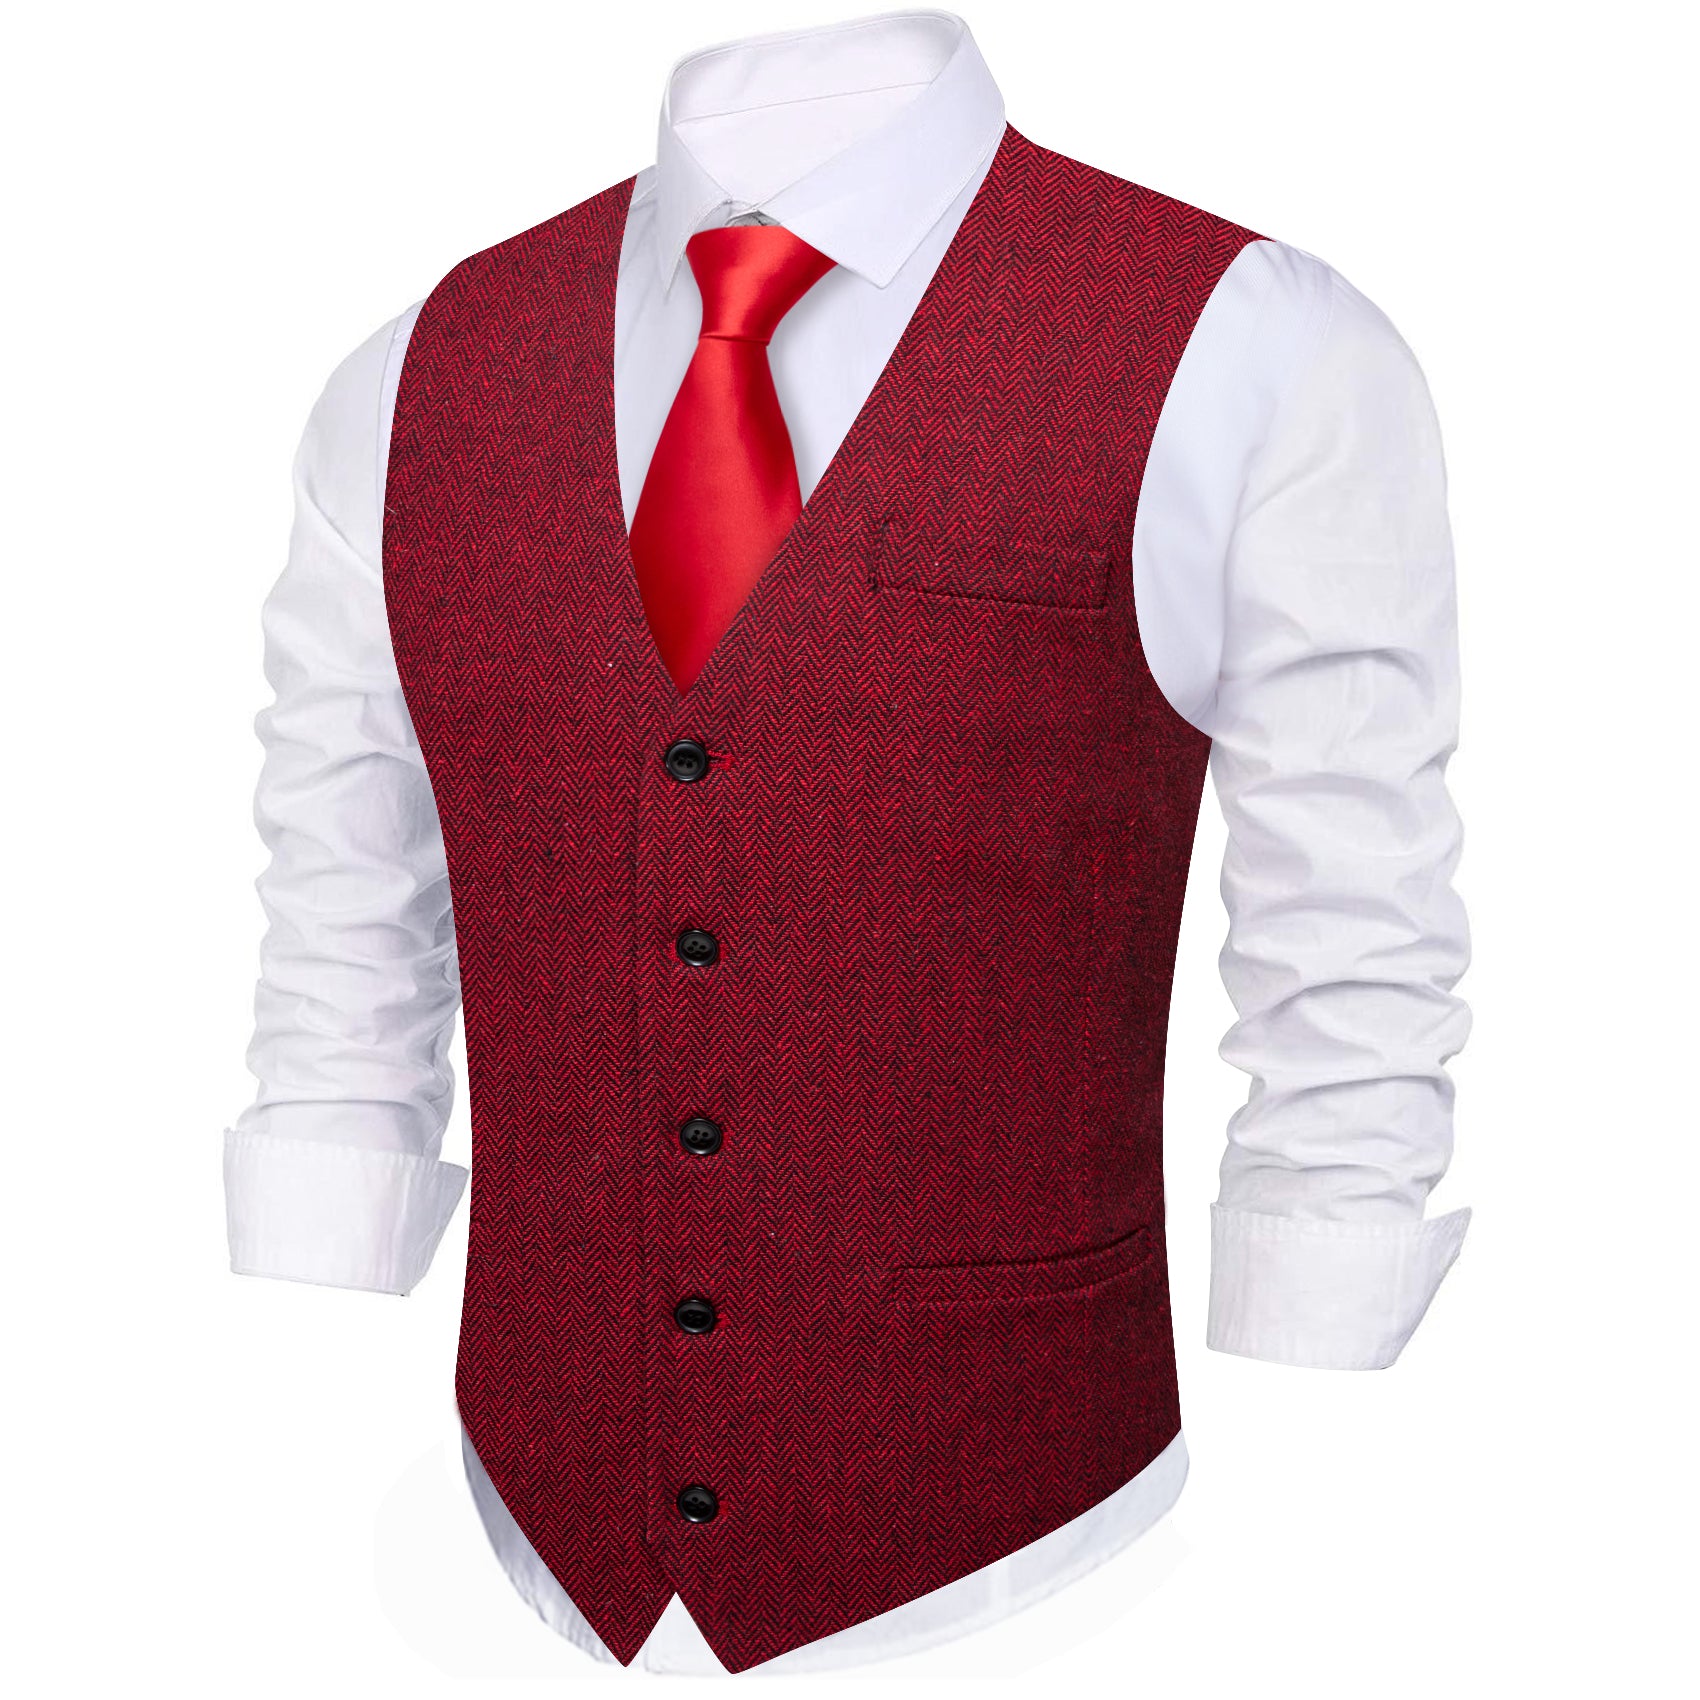 Barry.wang Fashion Red Solid Vest Waistcoat Set